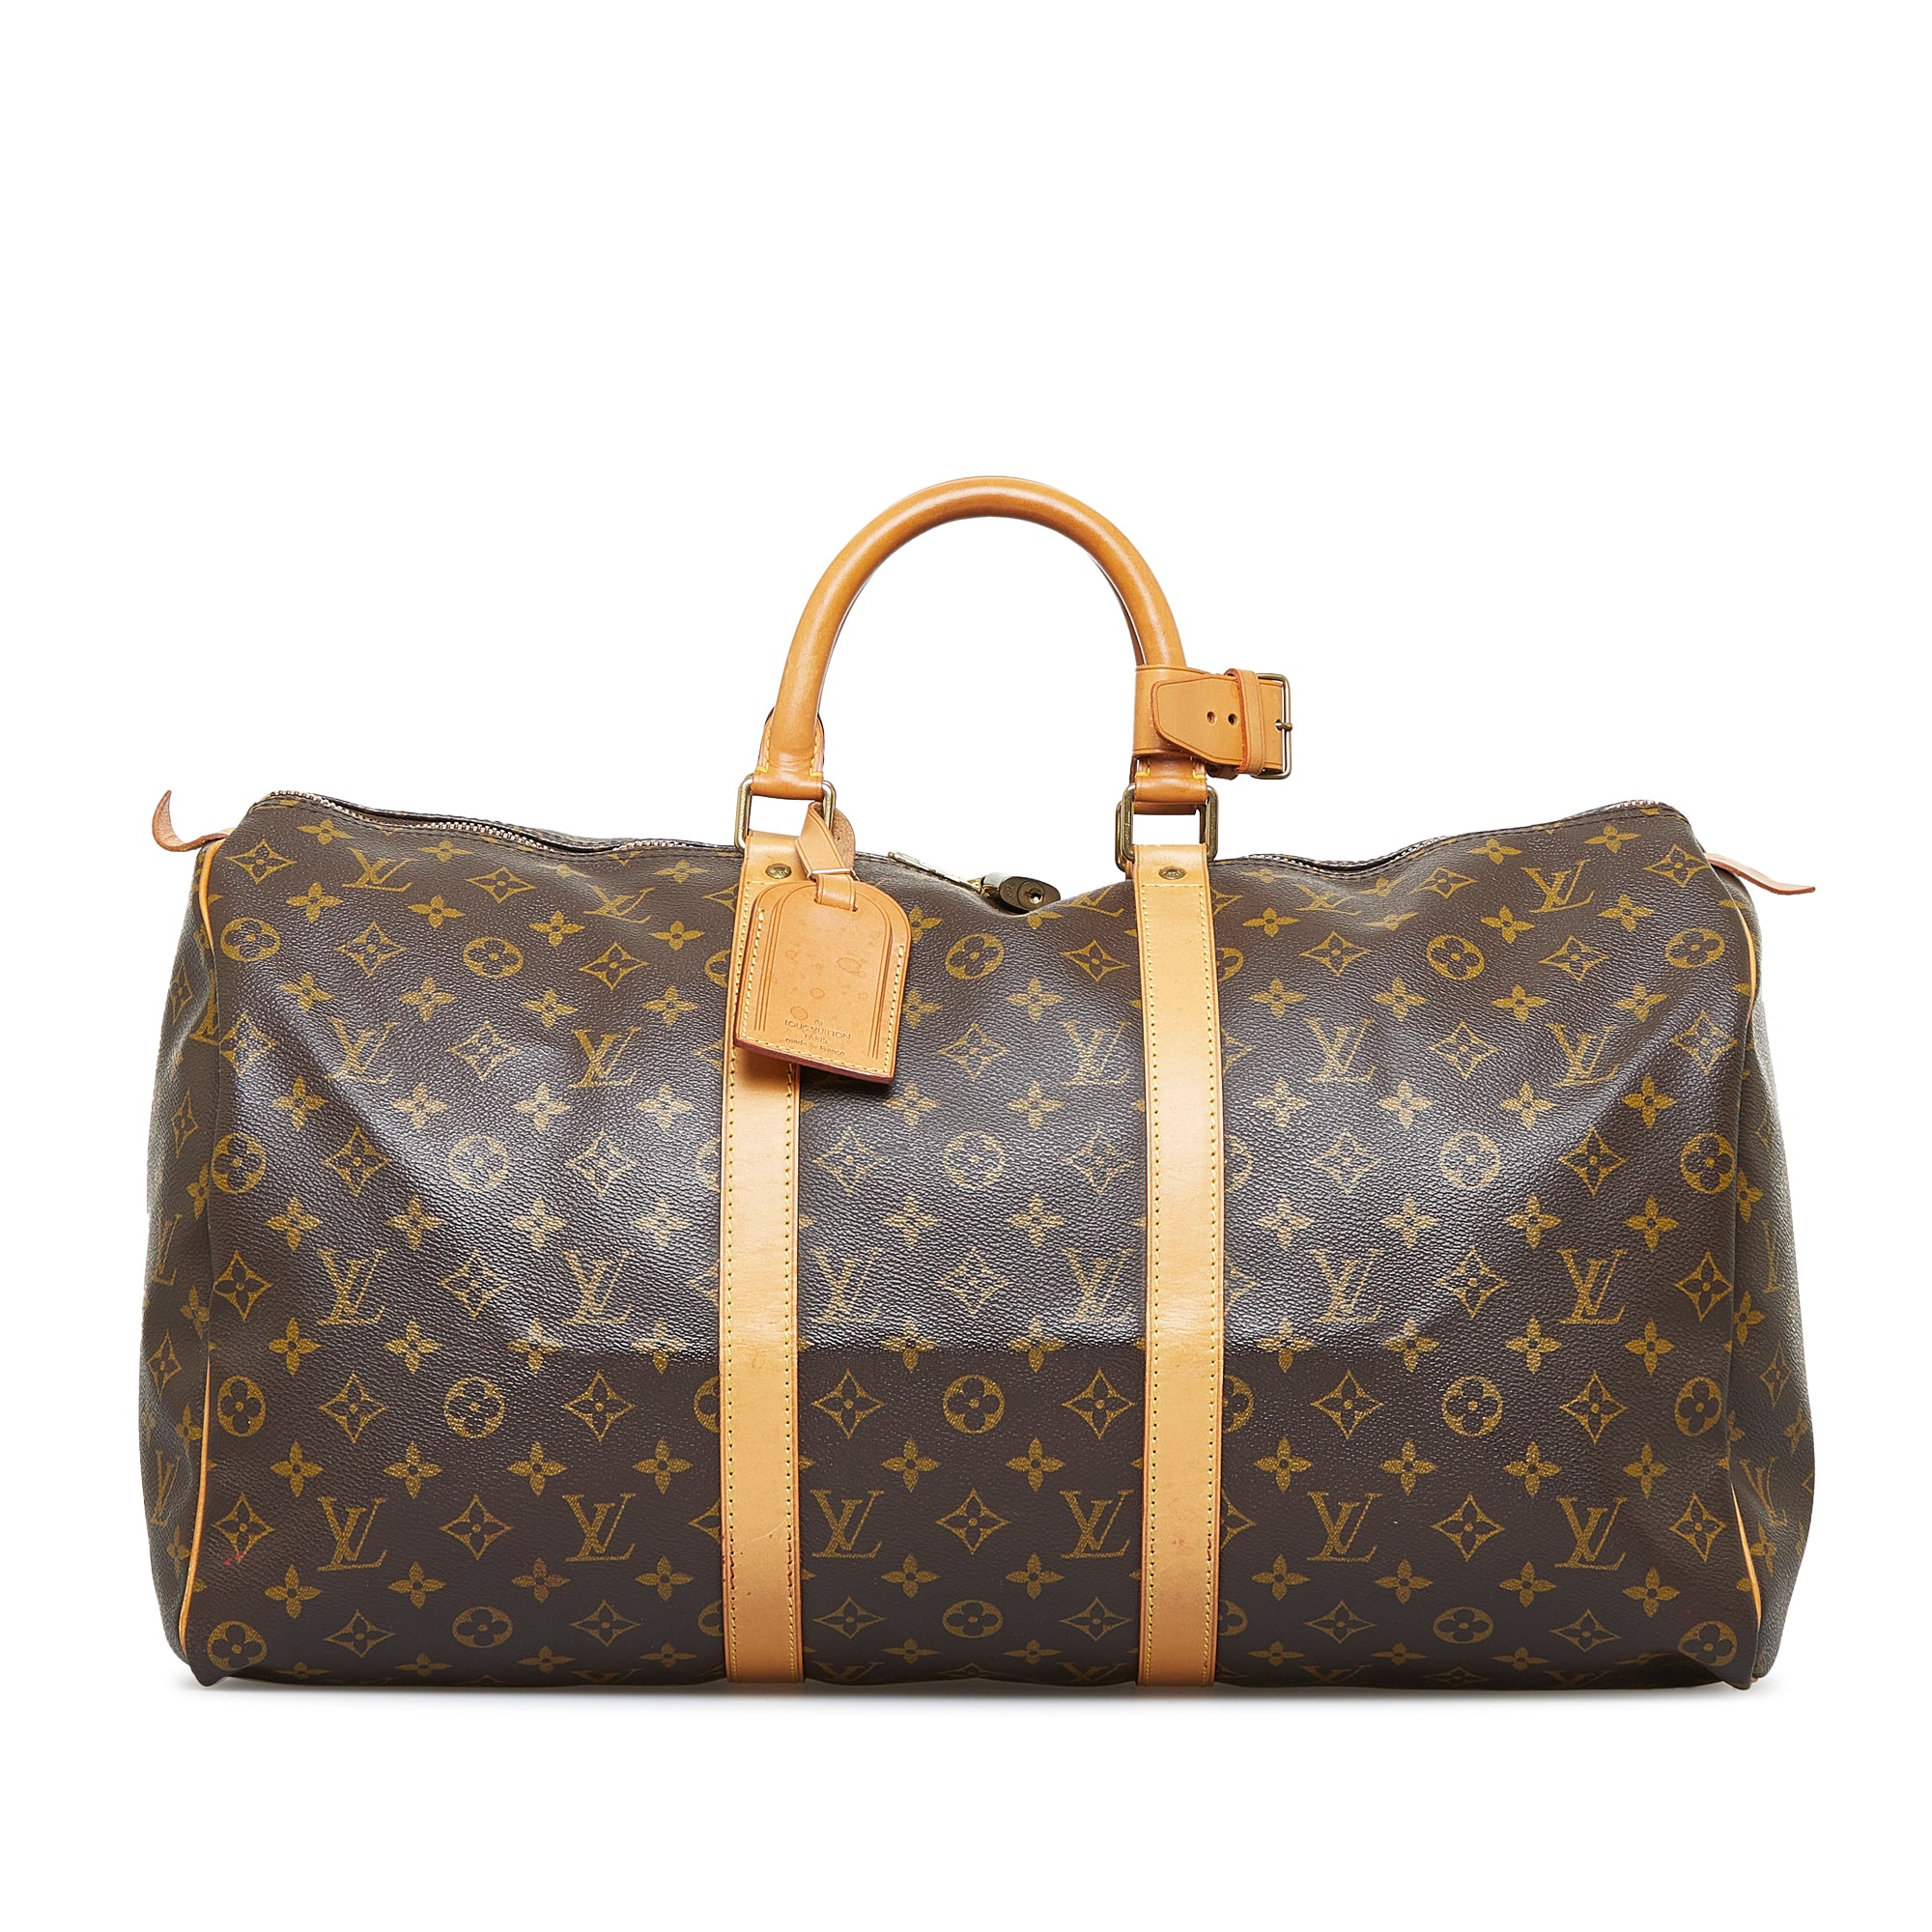 Louis Vuitton Keepall 50 Travel Bag in Gold Epi Leather